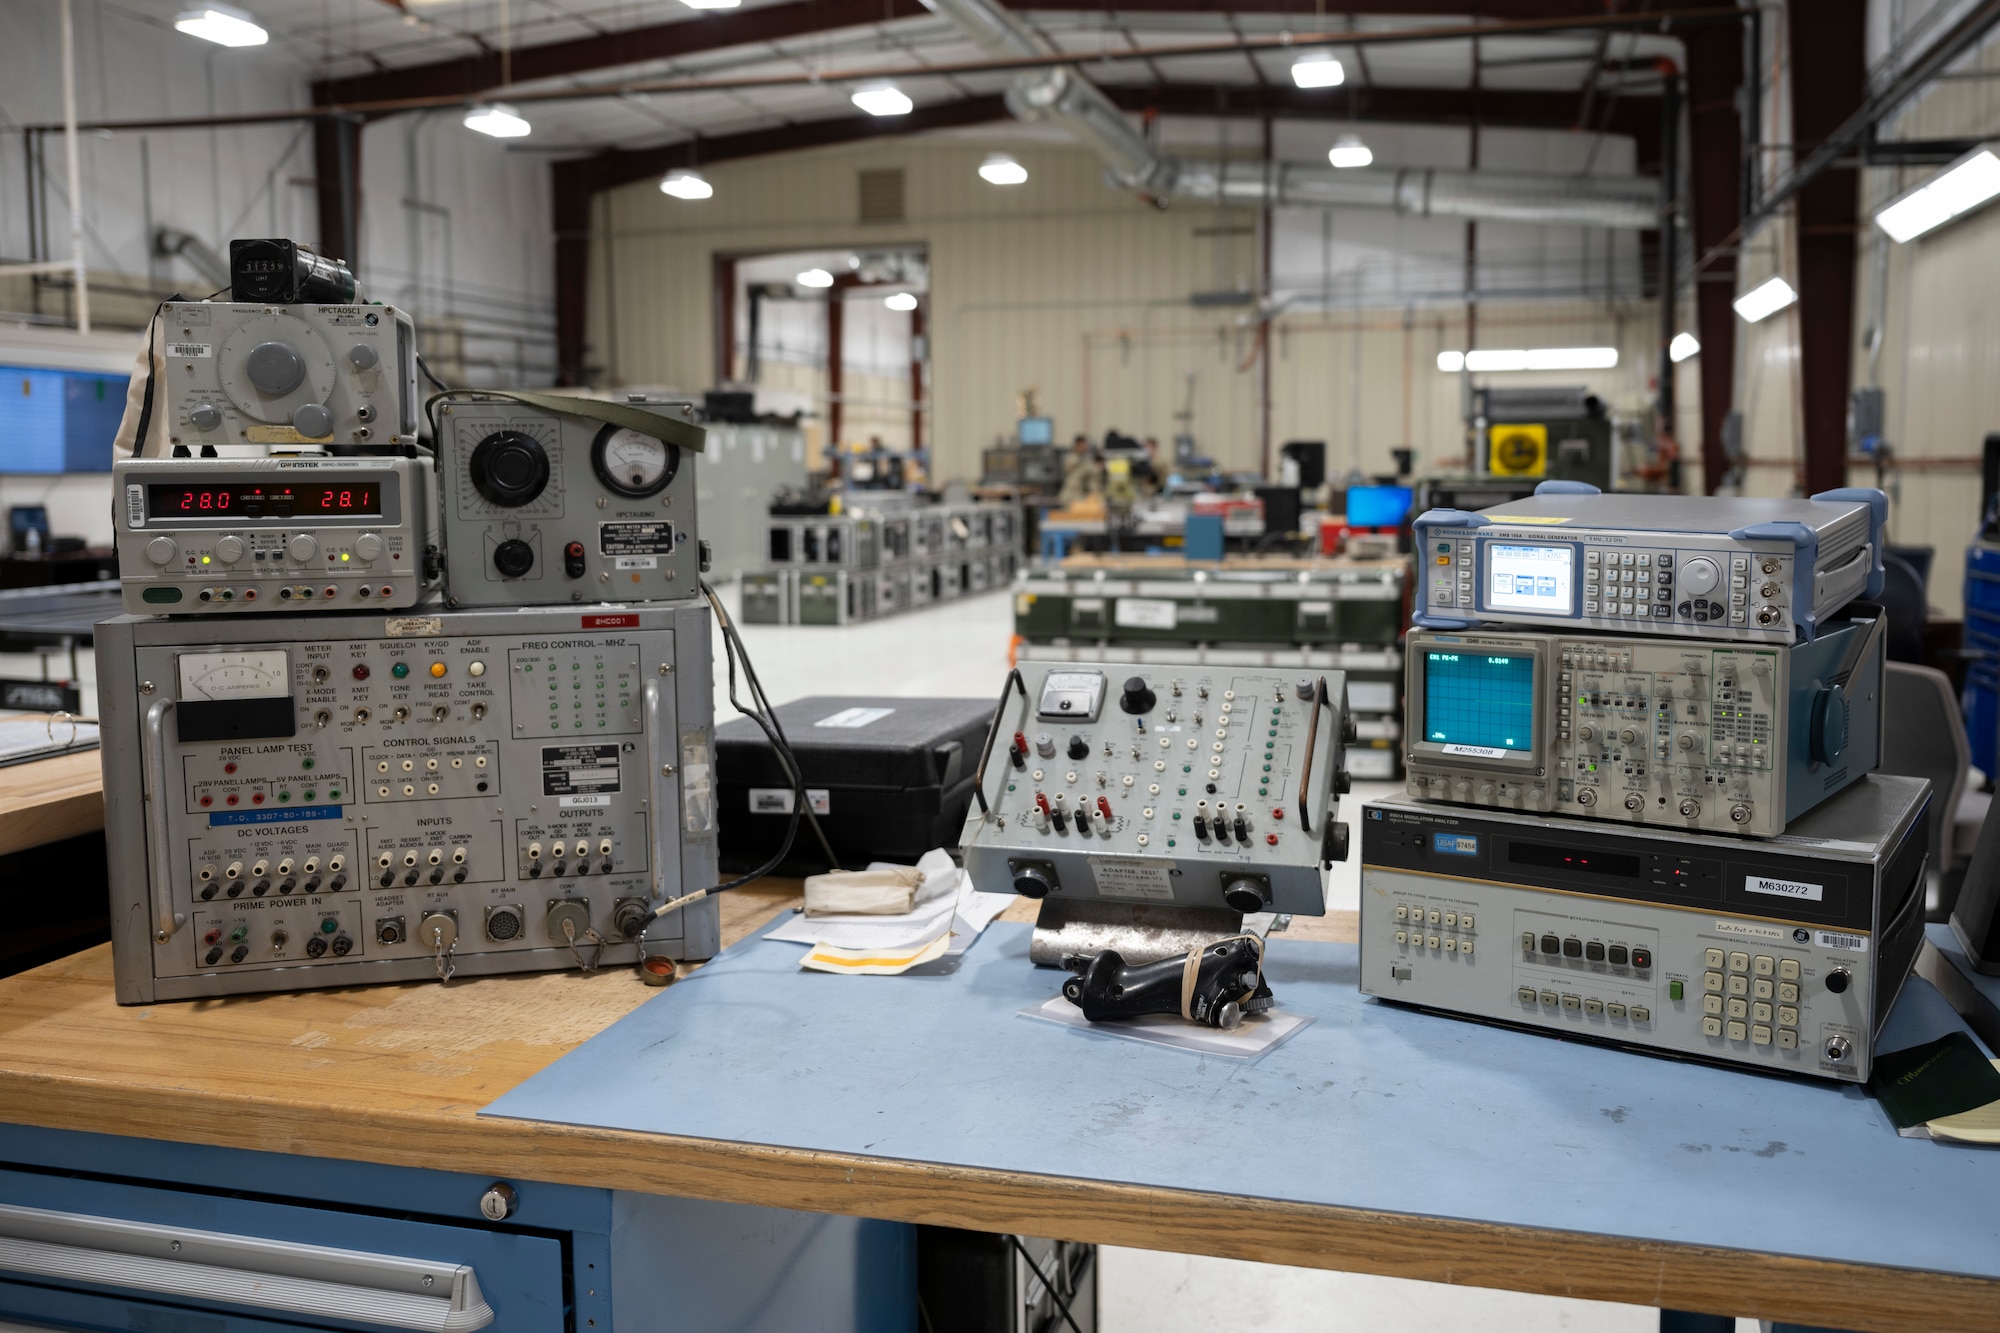 An ultra-high frequency radio transmitter is set up at the new 49th Component Maintenance Squadron facility at Holloman Air Force Base, New Mexico, May 1, 2023. The 49th CMS avionics shop has the largest workload of any active duty avionics back shop in the Air Force, working to keep F-16s in serviceable conditions. (U.S. Air Force photo by Airman 1st Class Michelle Ferrari)